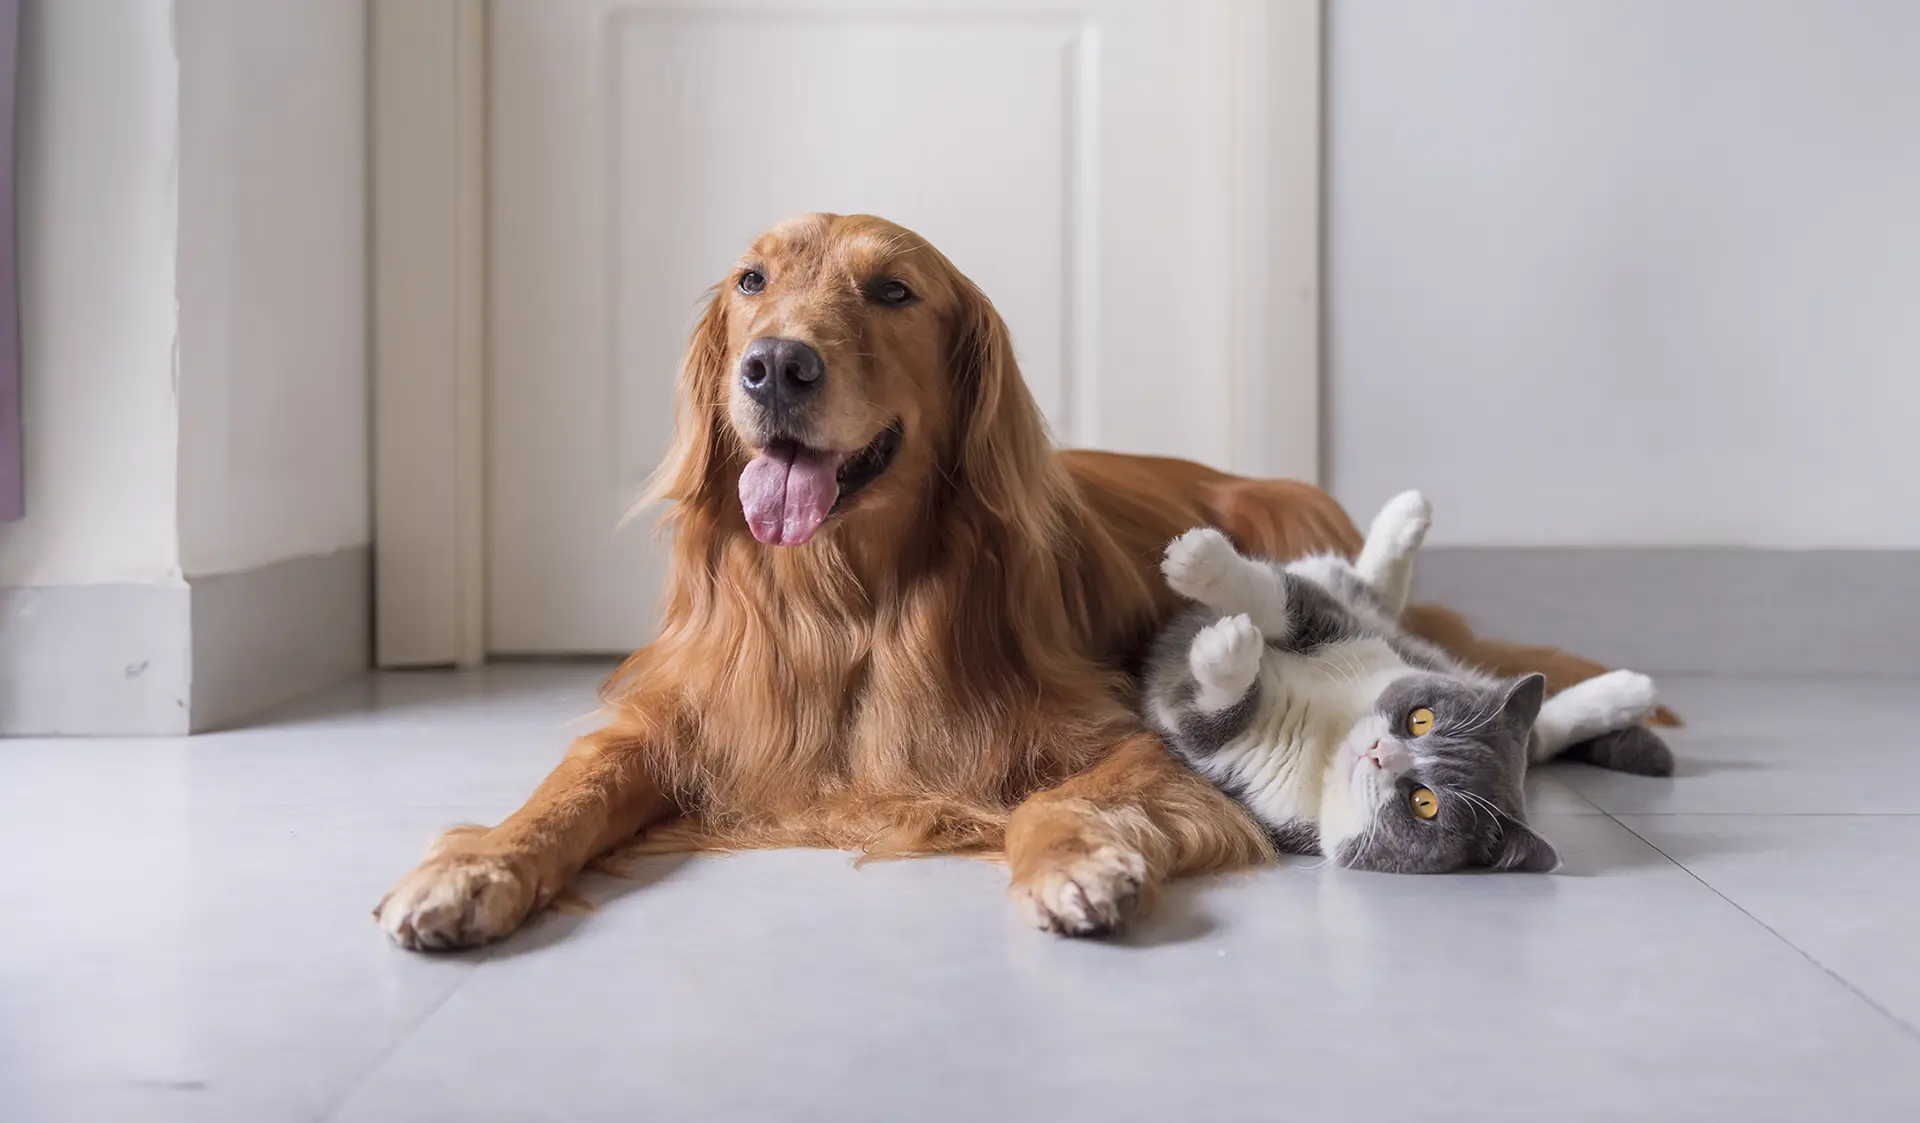 Golden retriever dog and British shorthair cat laying together